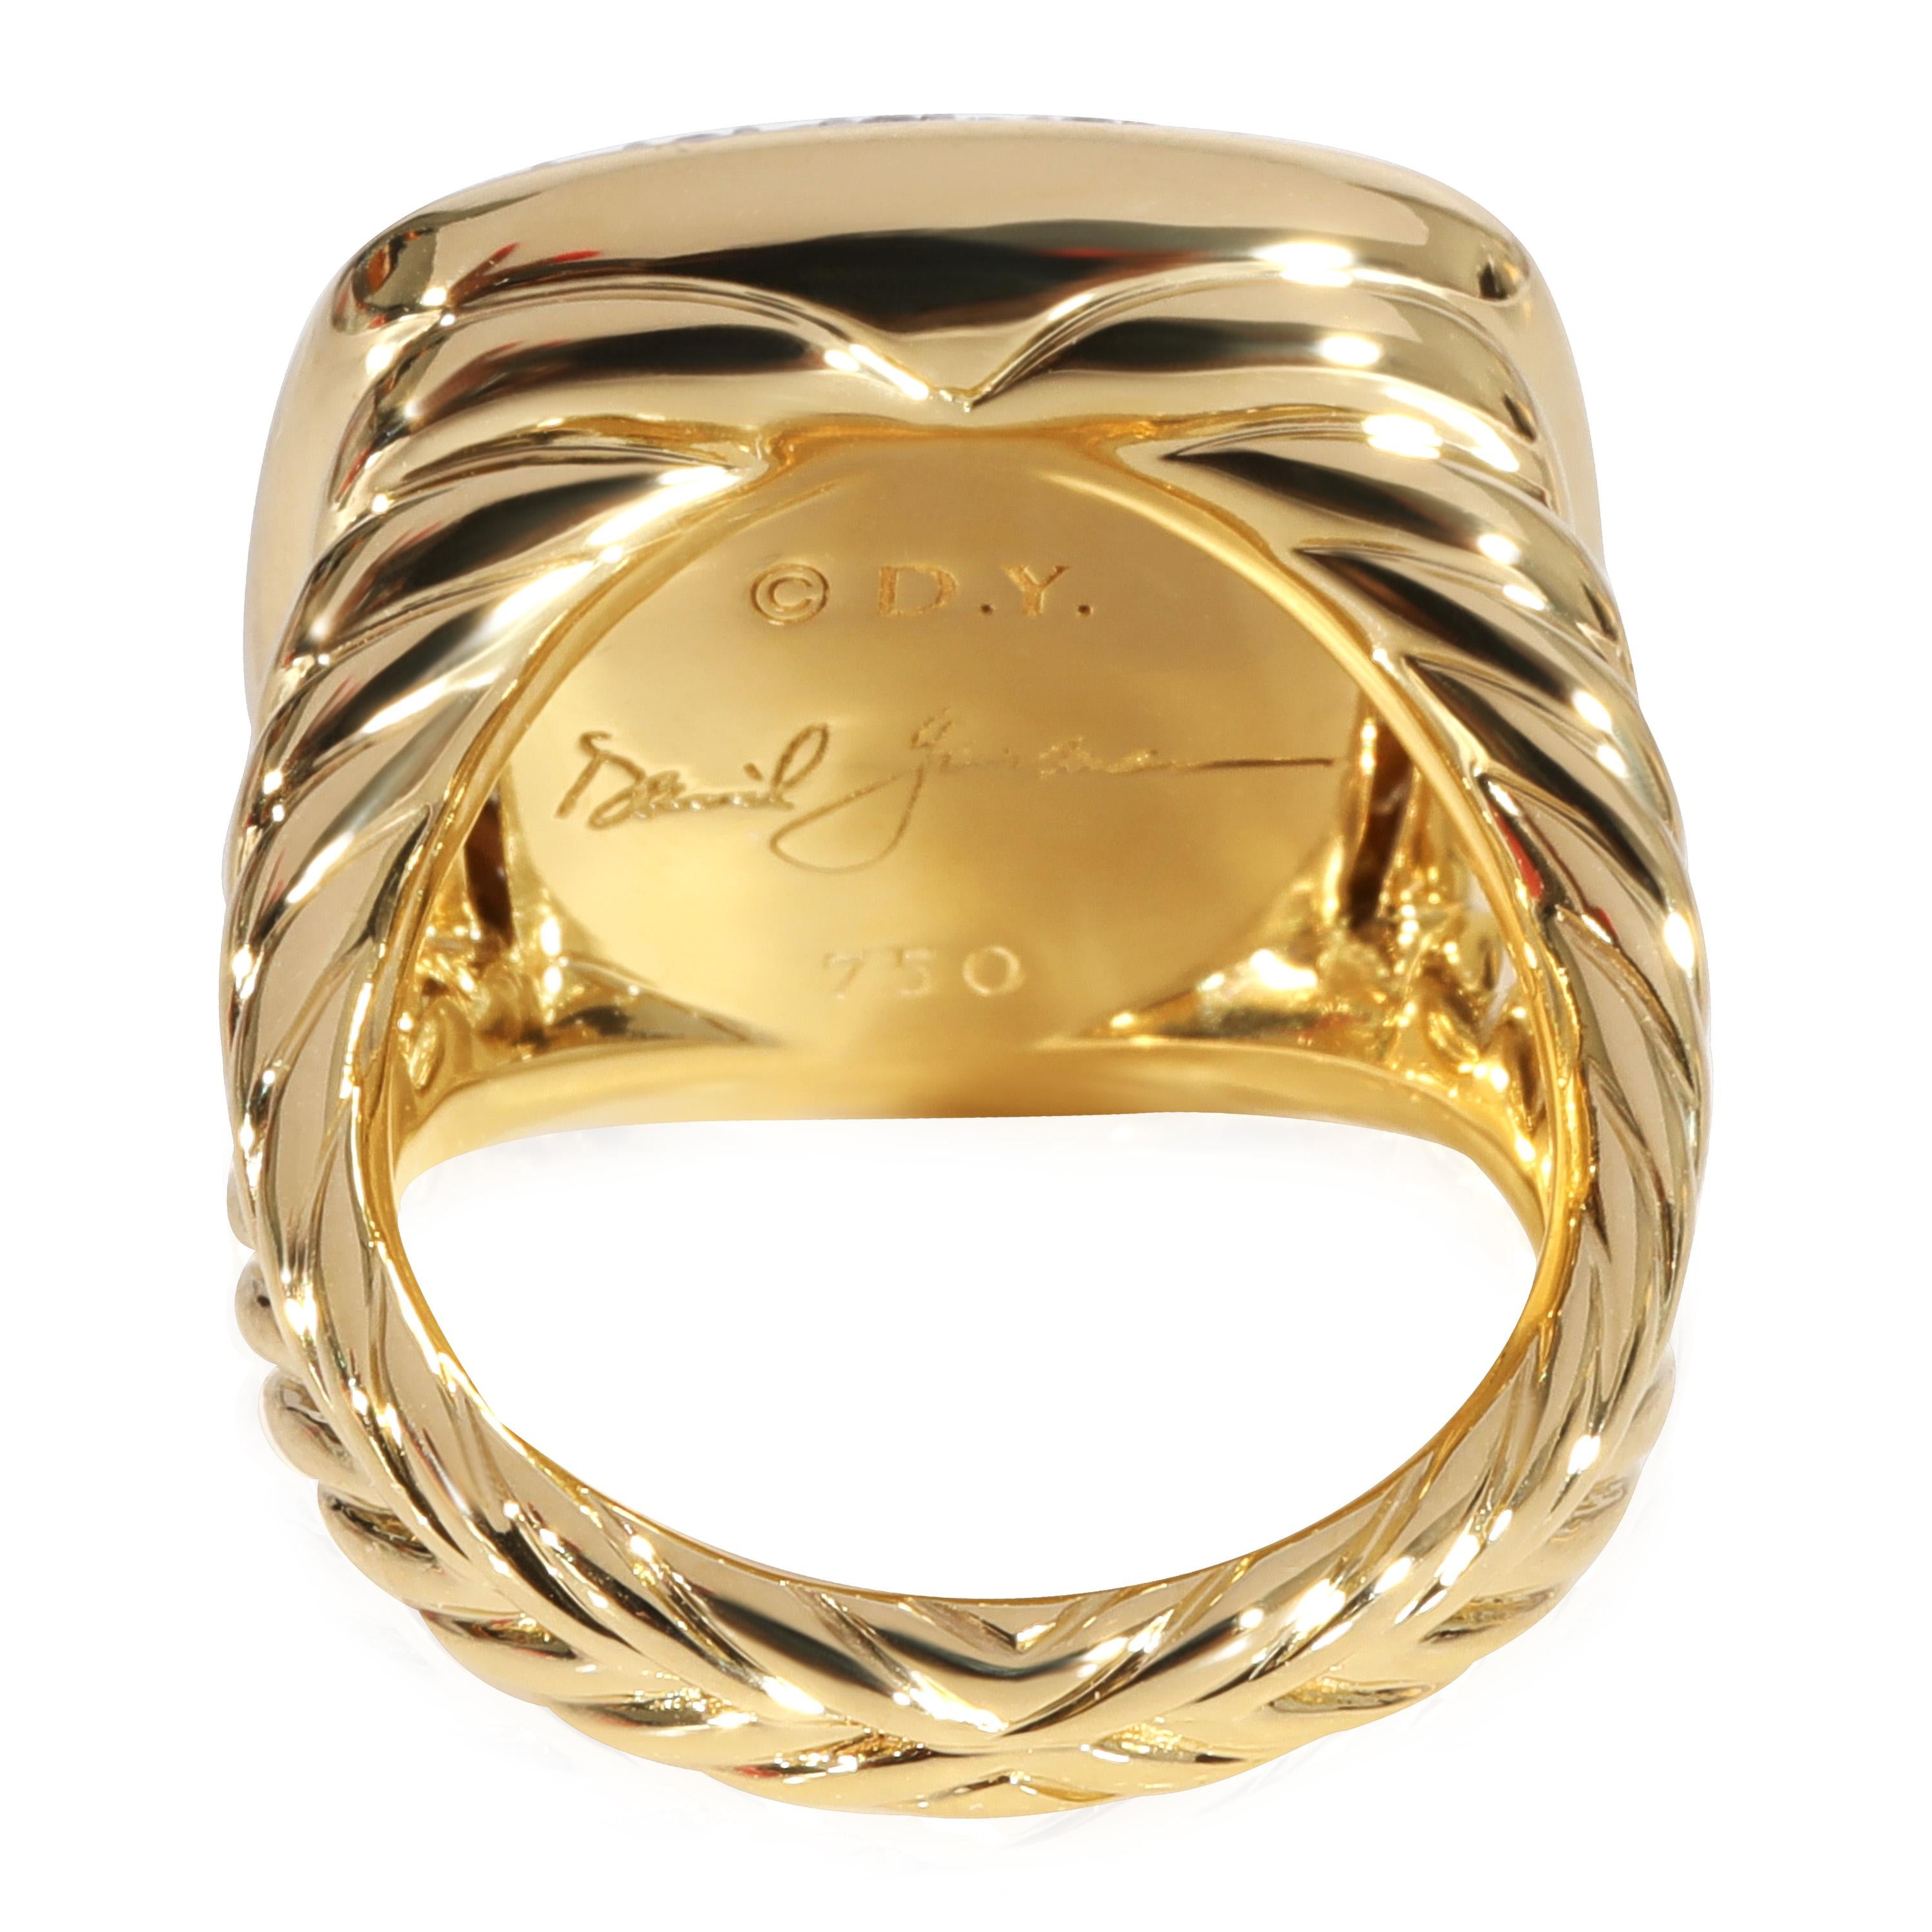 David Yurman Albion Citrine Diamond  Ring in 18k Yellow Gold 0.31 CTW

PRIMARY DETAILS
SKU: 121370
Listing Title: David Yurman Albion Citrine Diamond  Ring in 18k Yellow Gold 0.31 CTW
Condition Description: Retails for 4200 USD. In excellent